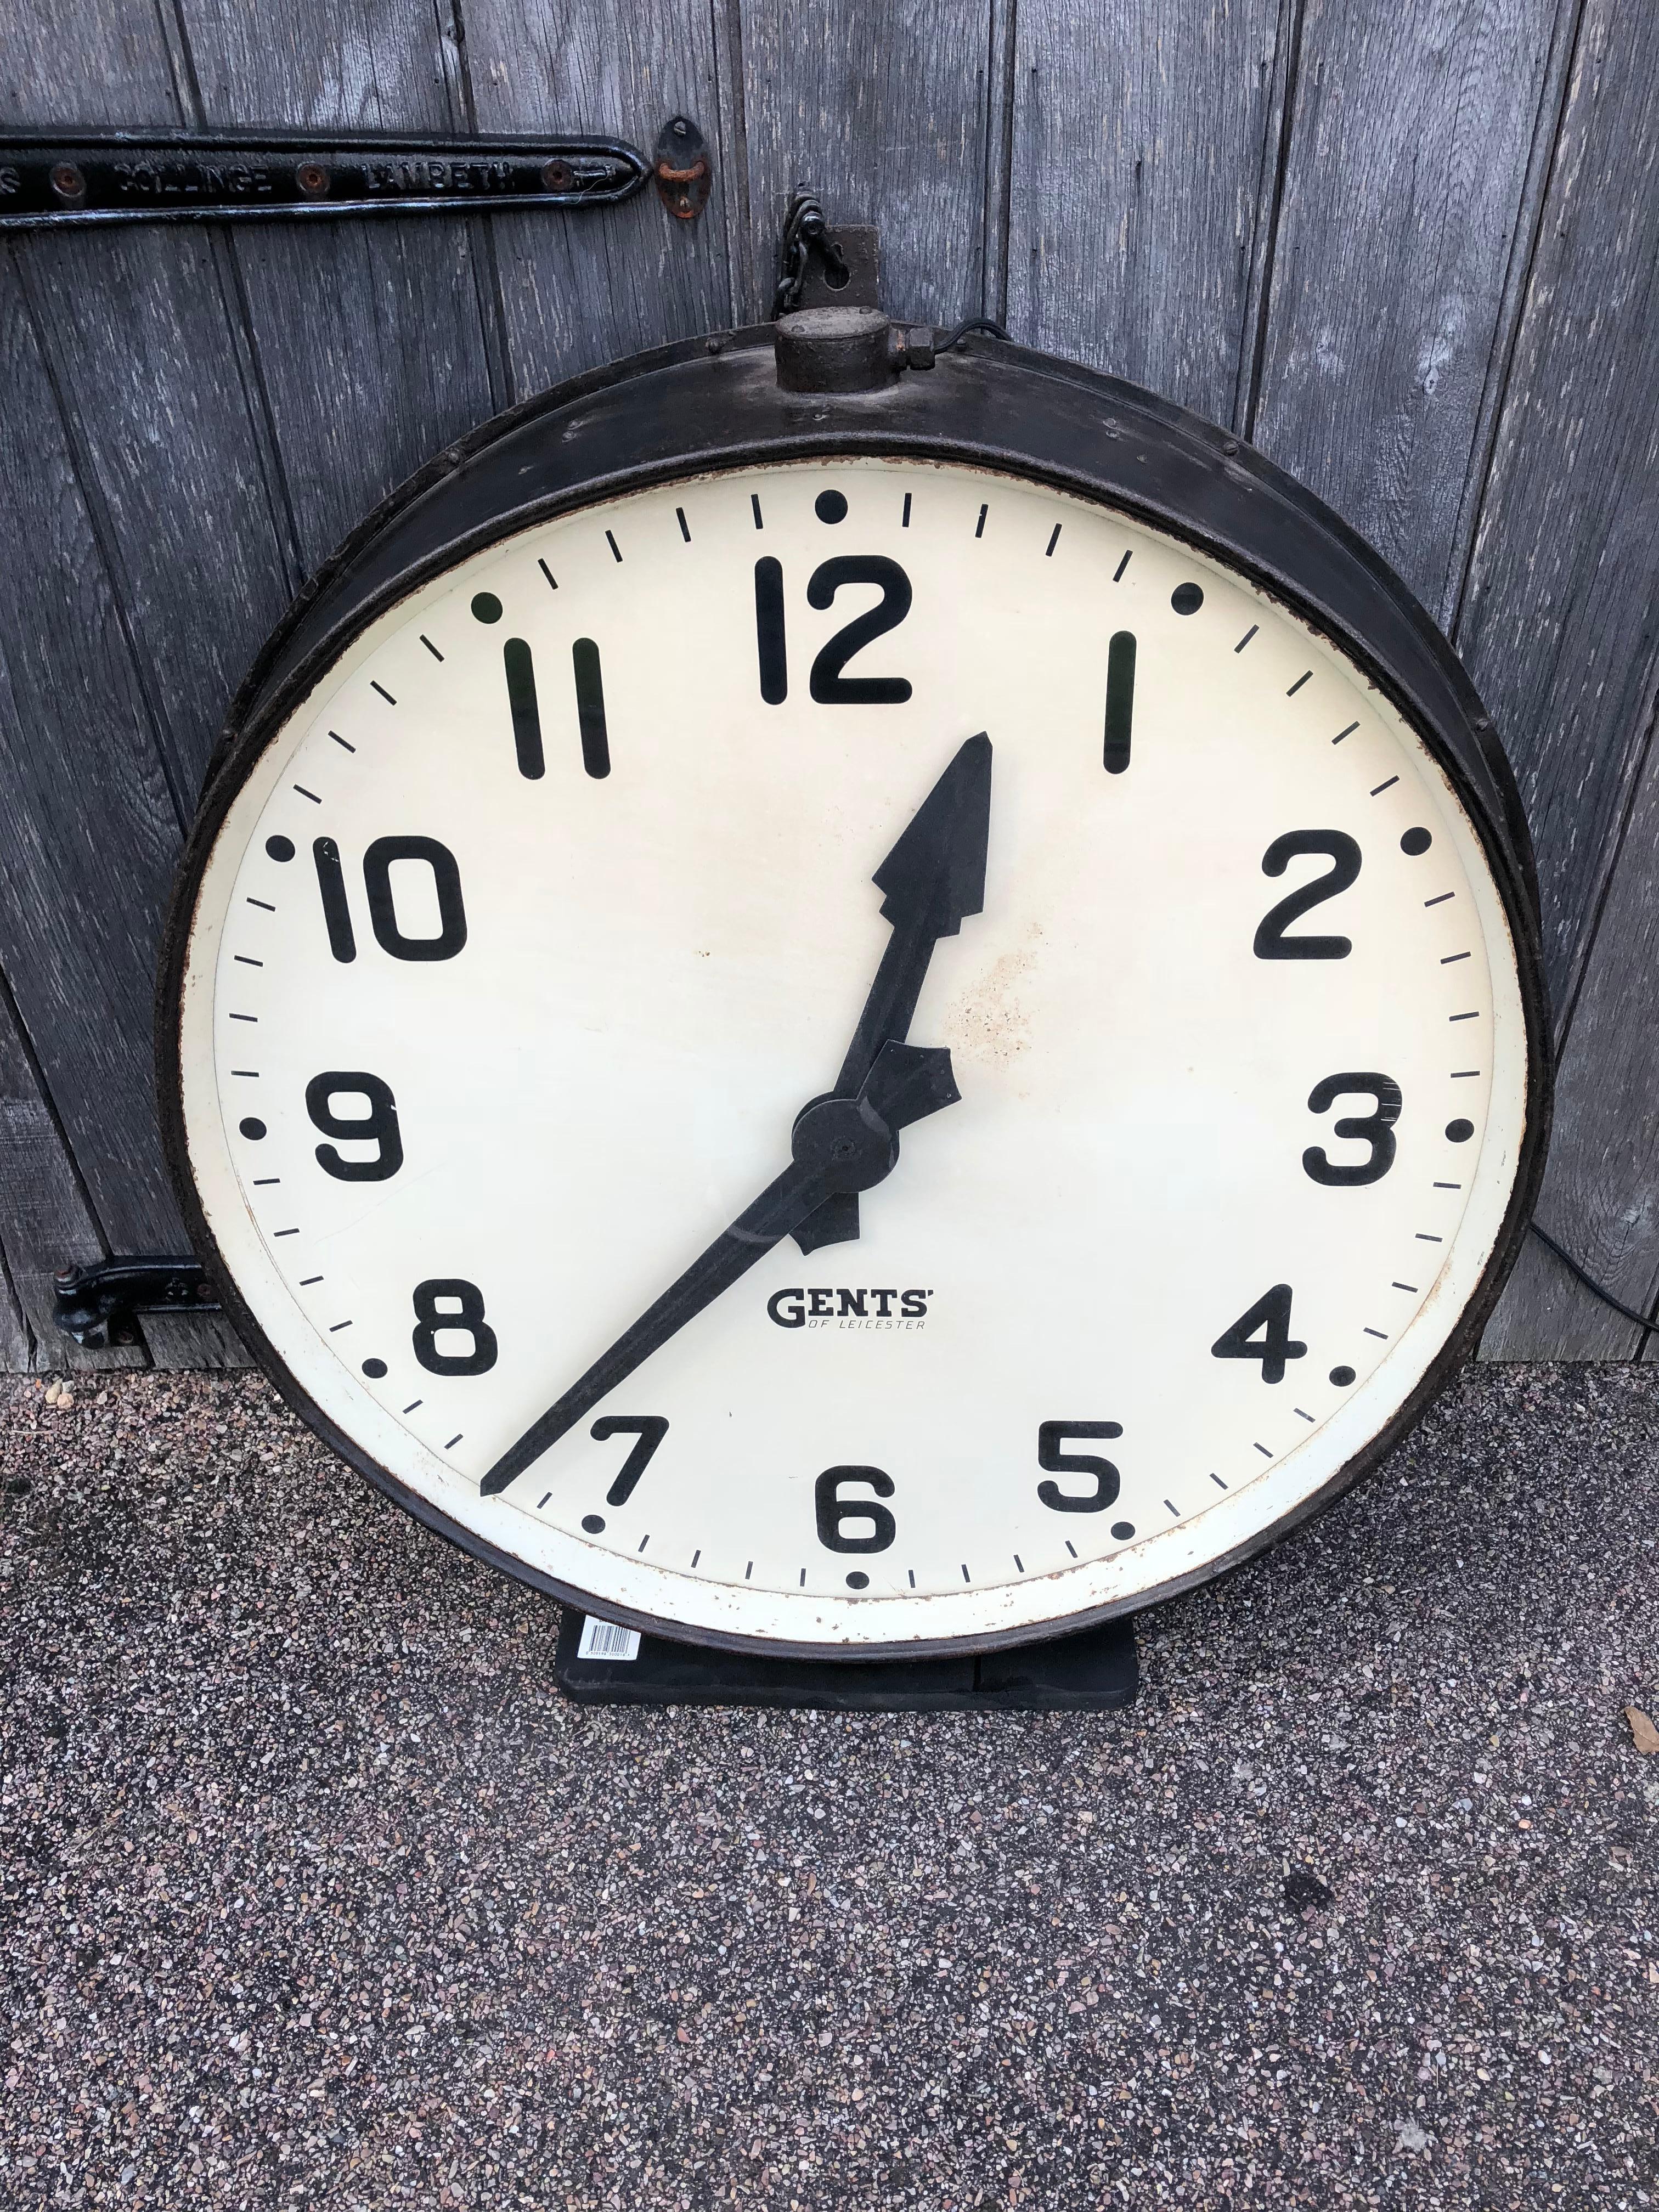 This huge clock face is 94 cm across with fixing points extra. The case is made of steel. We have fitted a new 240v mains driven unit and the clock is PAT tested. The clock came form a colliery in Wales, originally made by Gents of Leicester to a